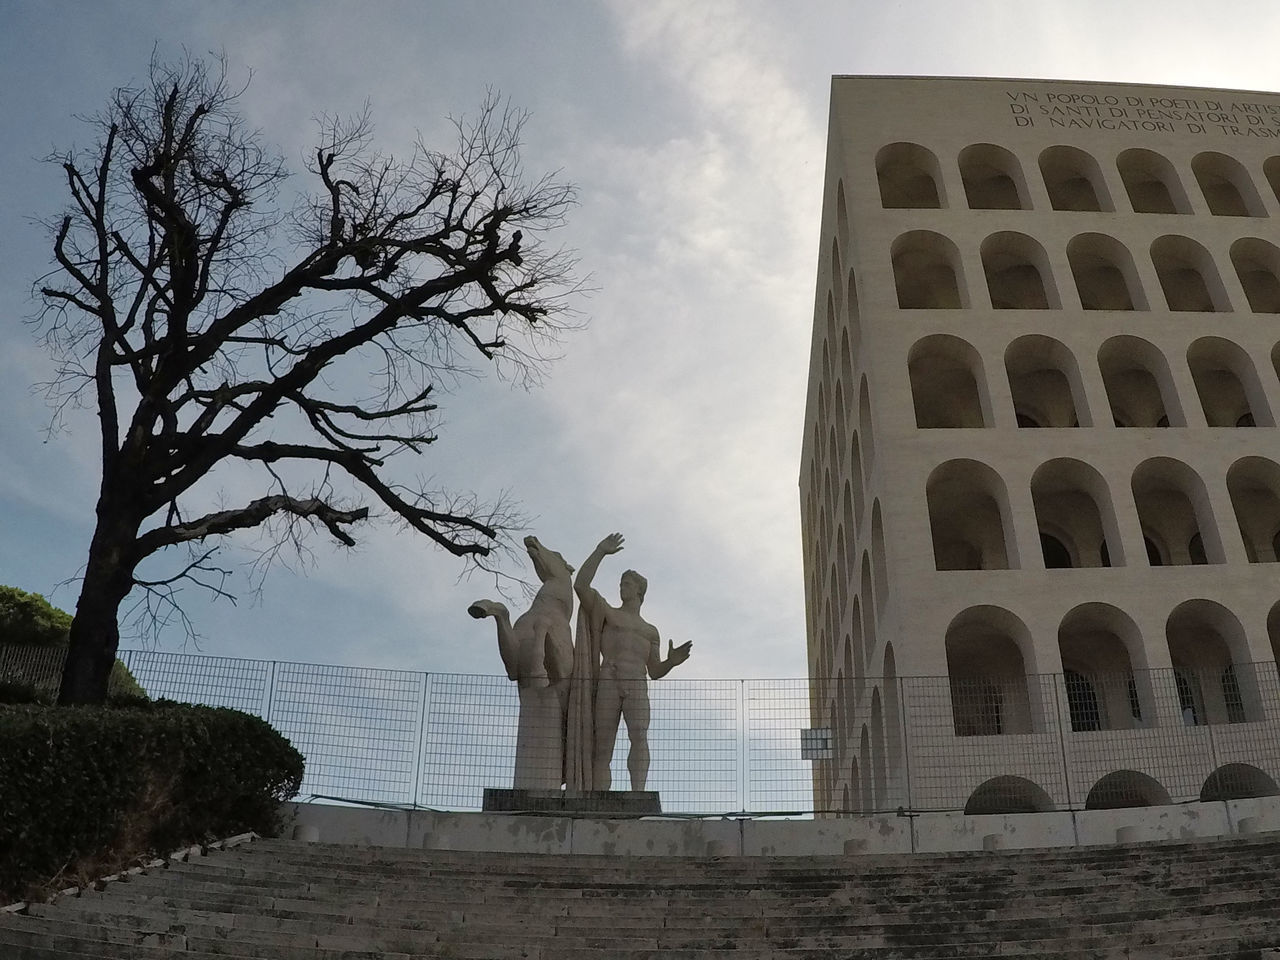 LOW ANGLE VIEW OF STATUES ON BUILDING